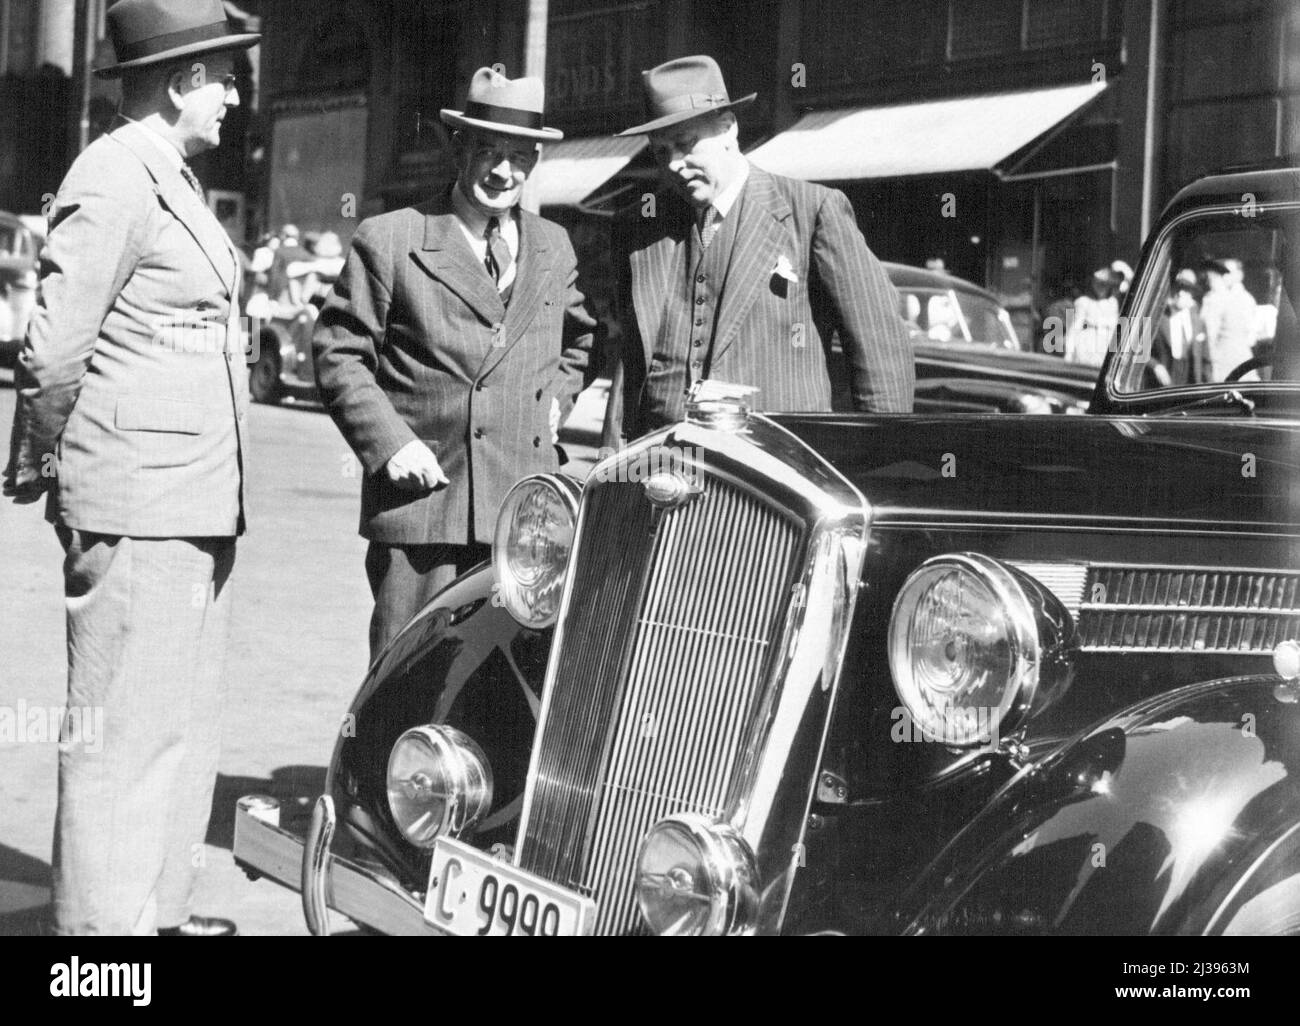 This New English car, latest 18-85 horse - power Wolseley, being presented in Martin-place to Mr. H. T. Armitage, Governor of the Commonwealth Bank, by Mr. G. A. Lloyd, Managing Director Nuffields Australia Pty., Ltd. On the left is Mr. Sheehan, Deputy - Governor, Commonwealth Bank. January 31, 1945. Stock Photo